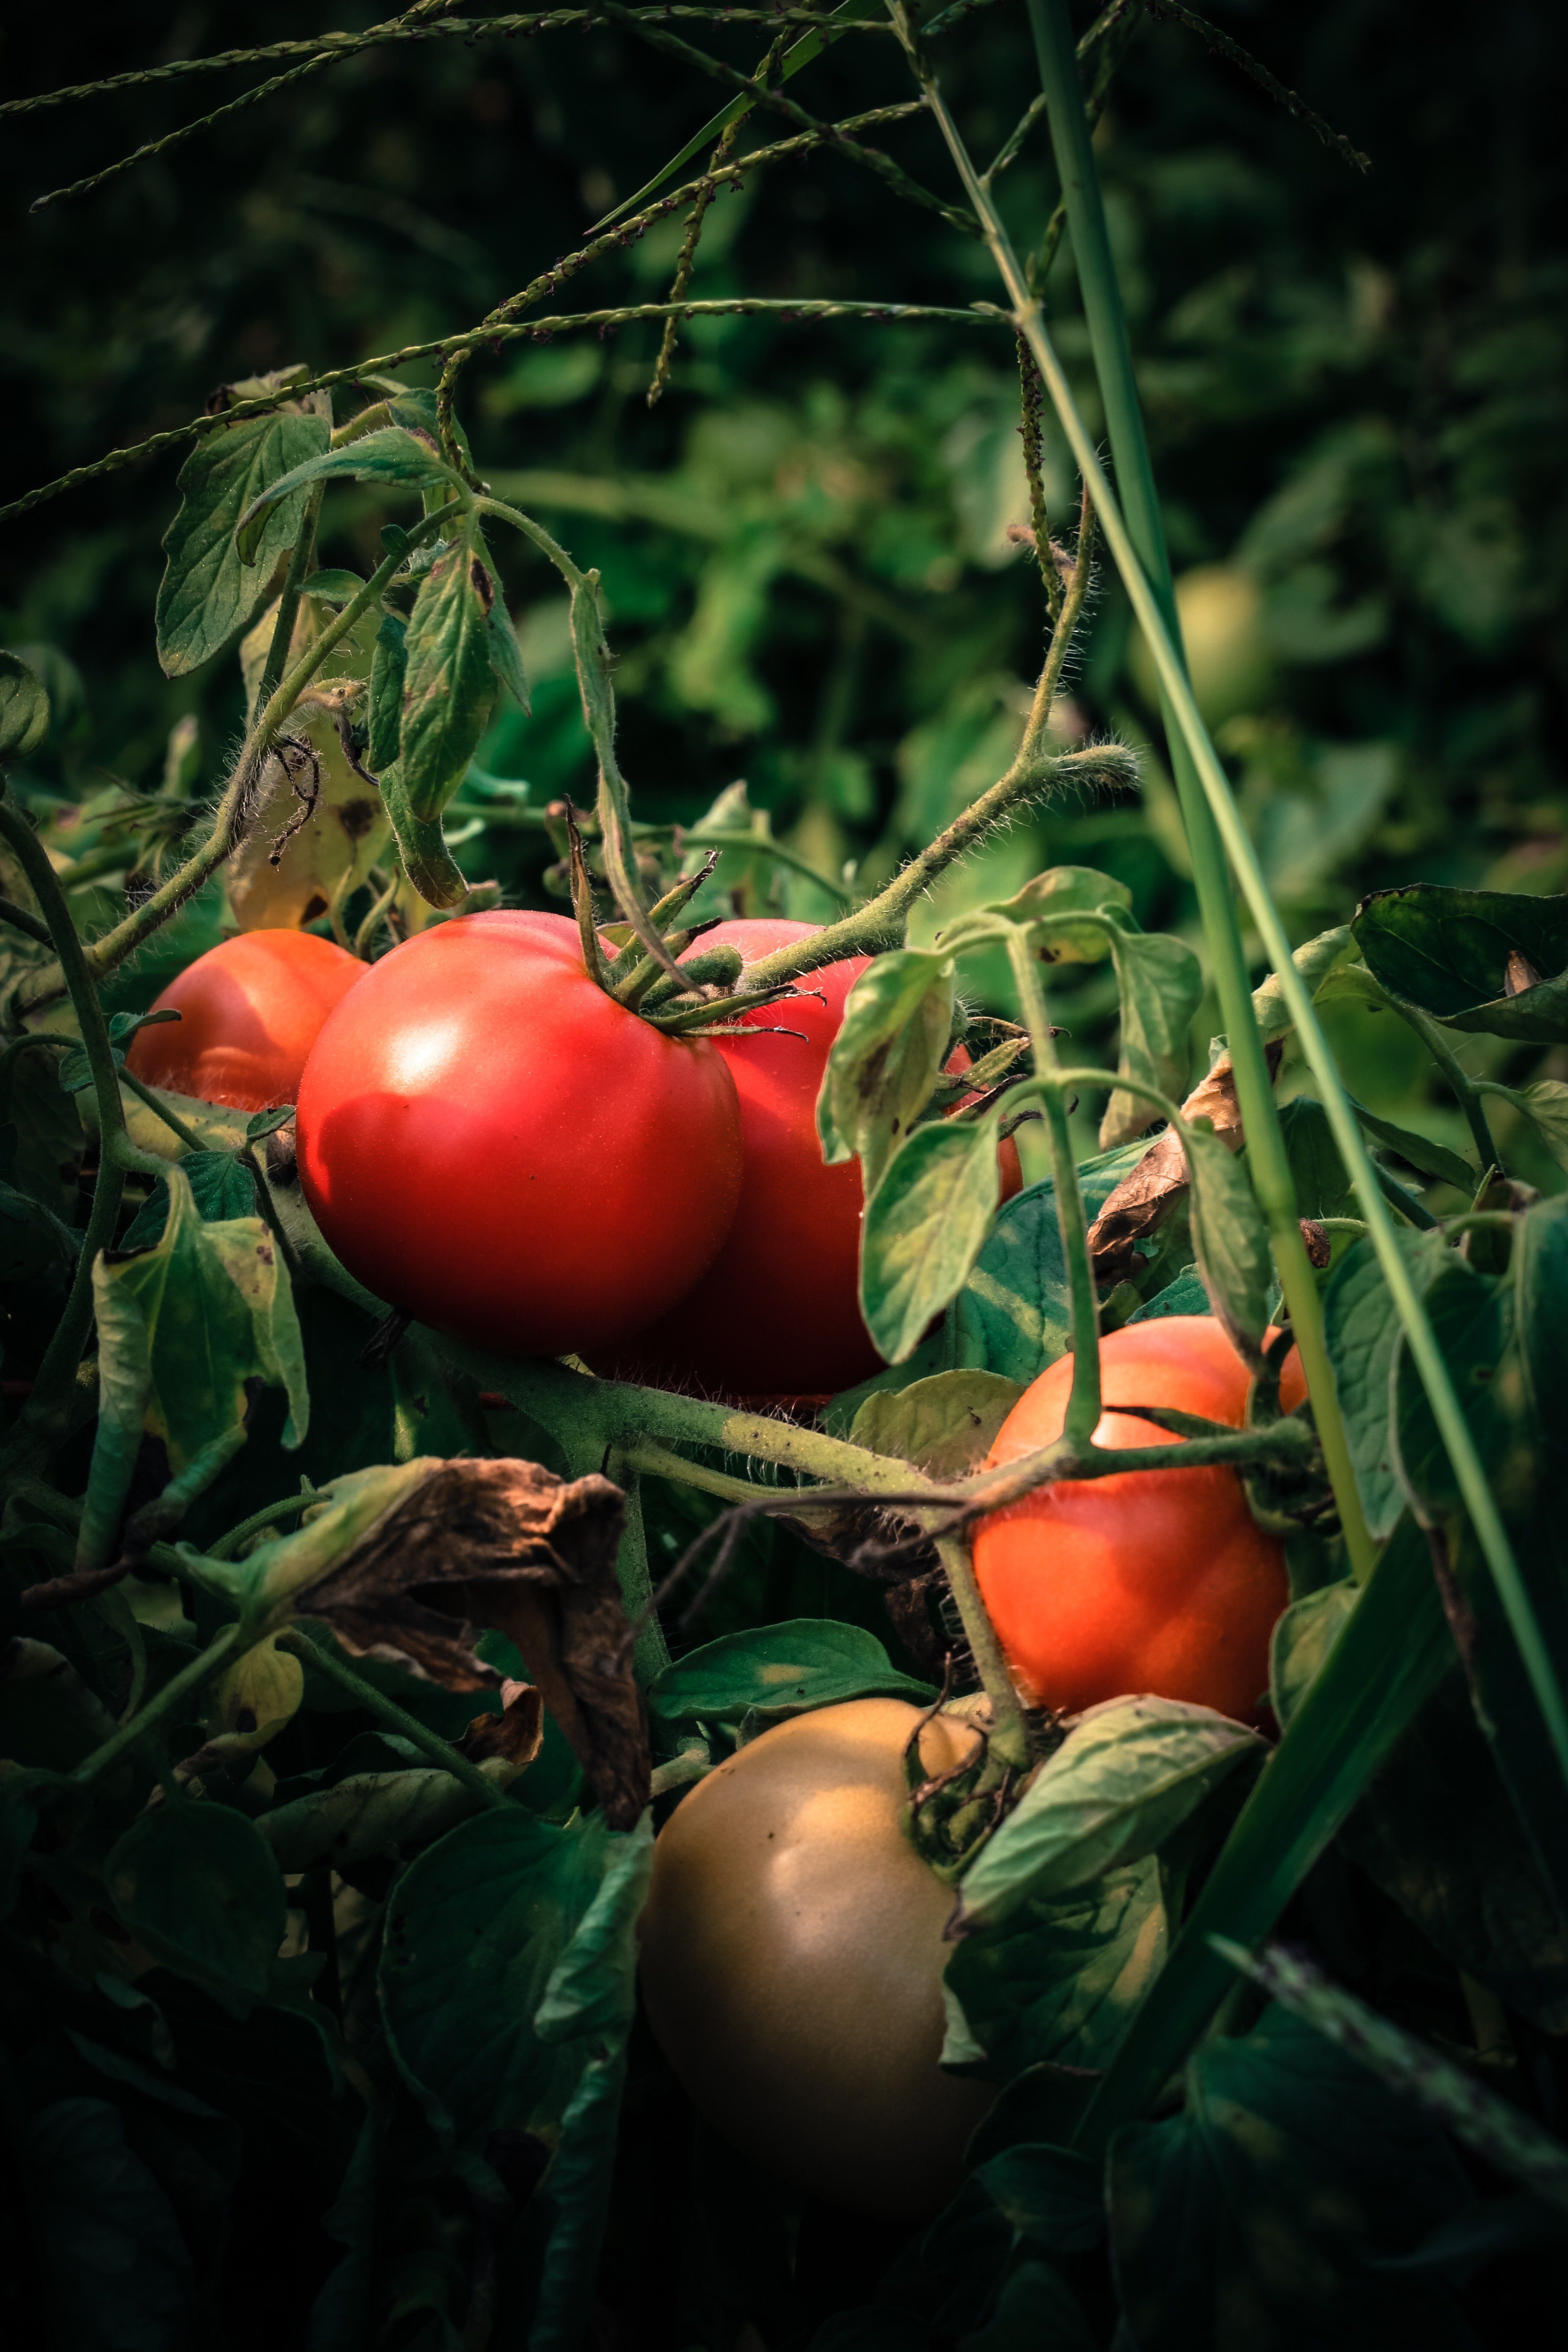 Next Happening: Bulk Tomato Sale Saturday September 5, 2020 at the Suffield Farm